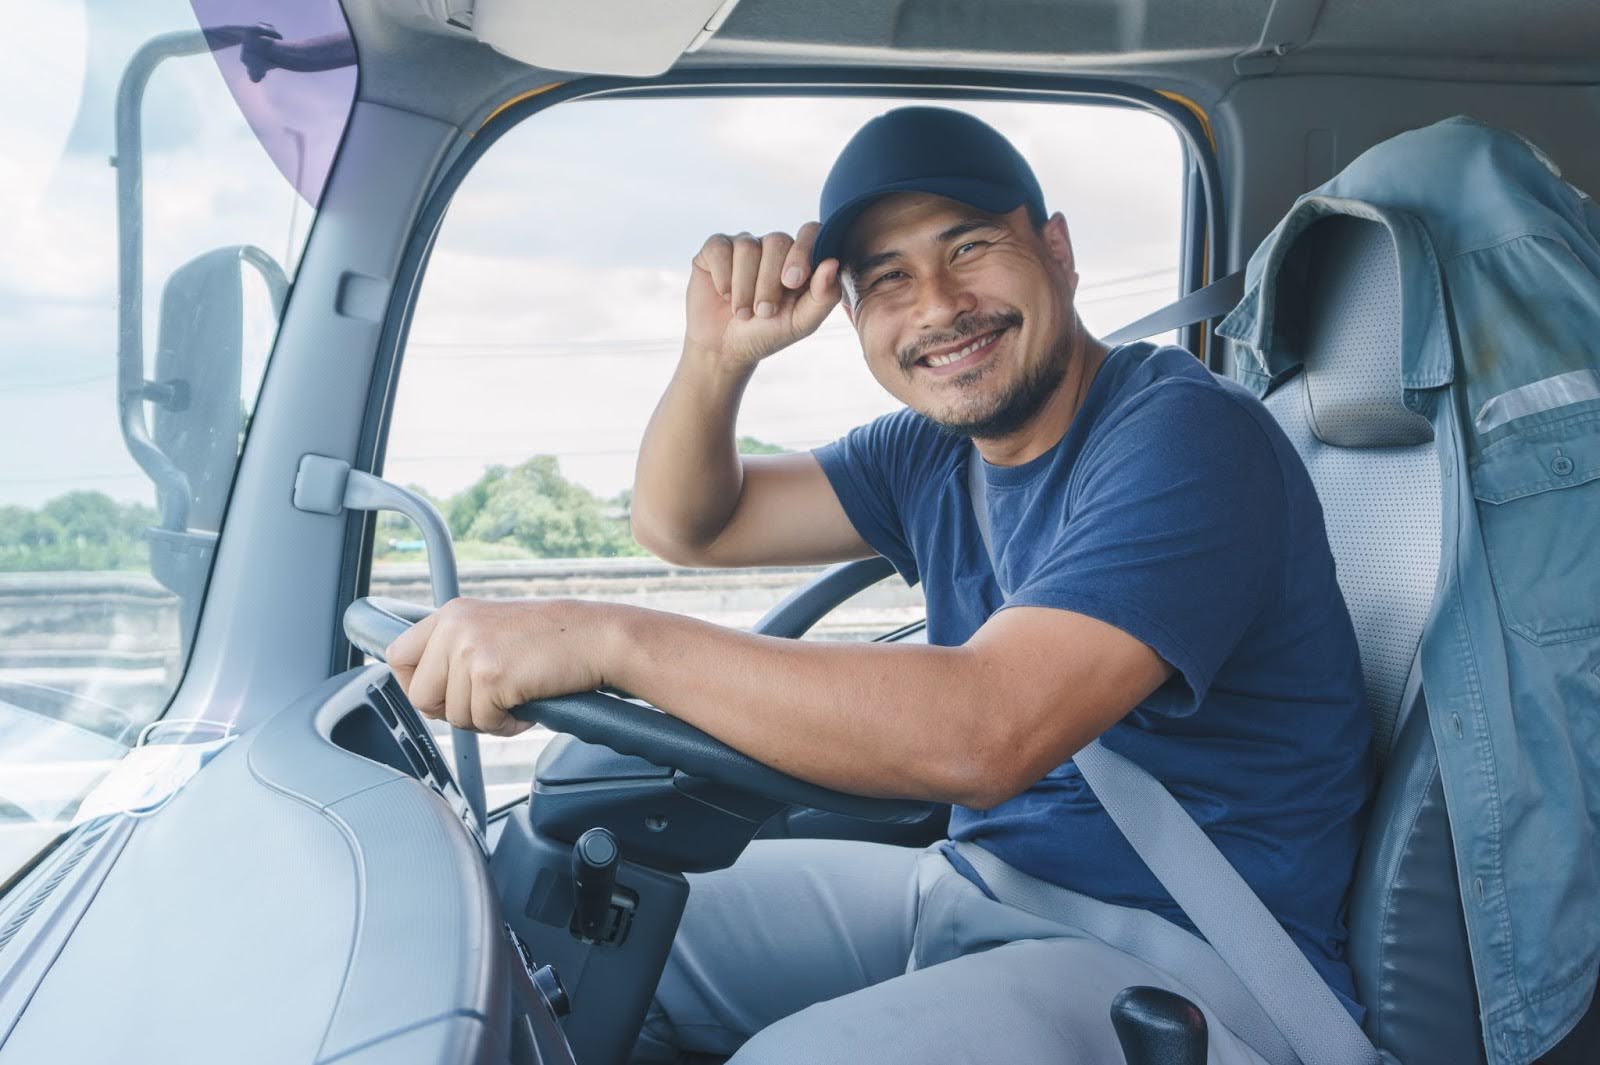 A trucker with a CDL license building his career.